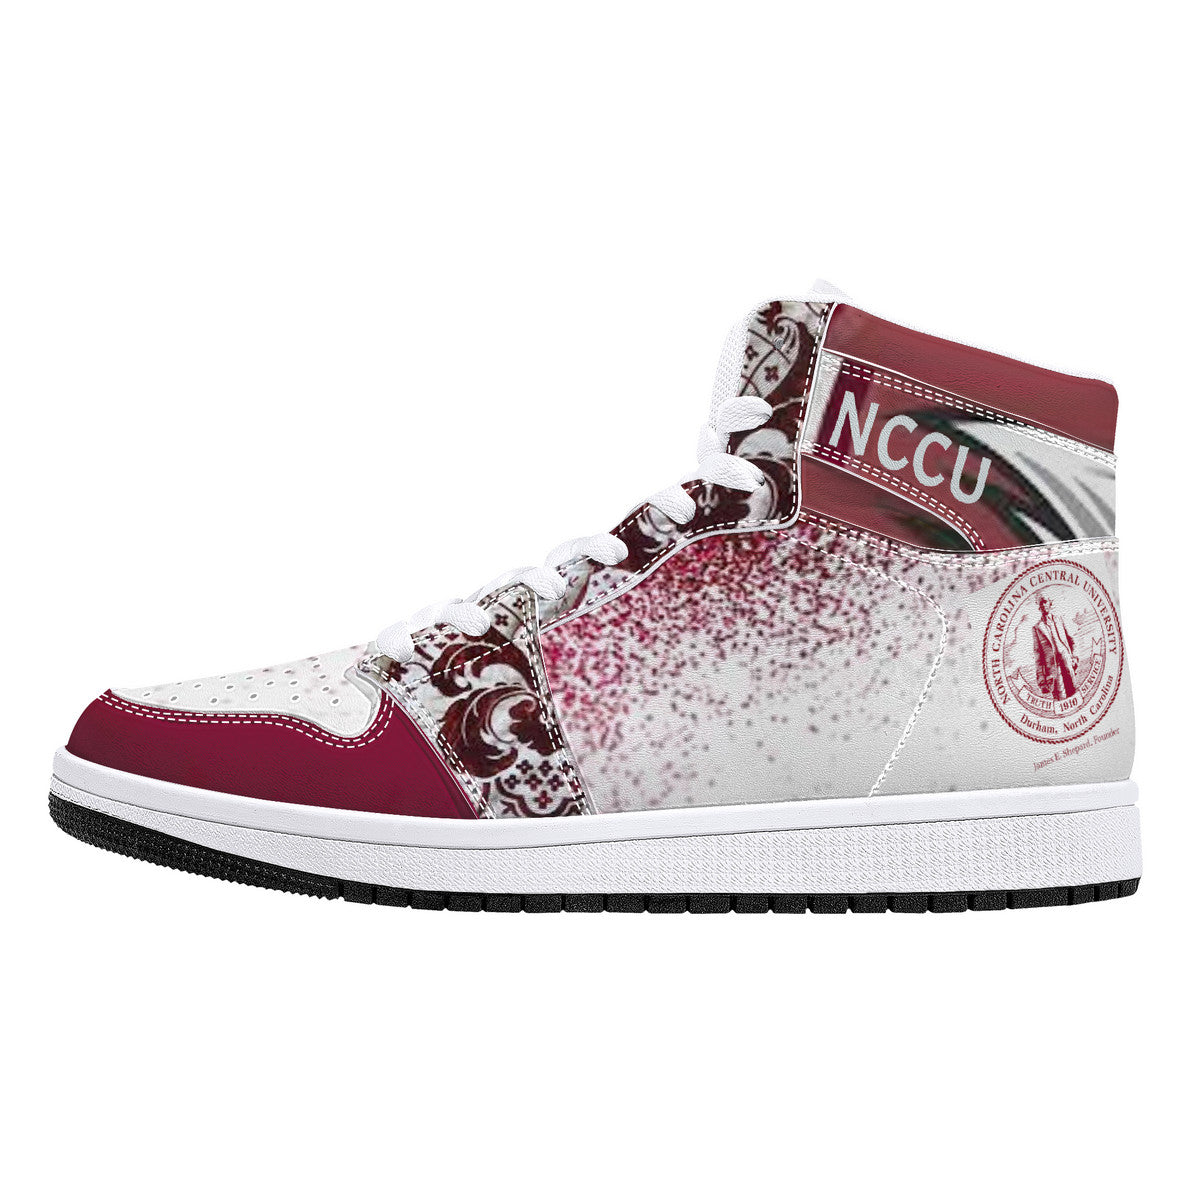 NCCU High-Top Leather Sneakers - White